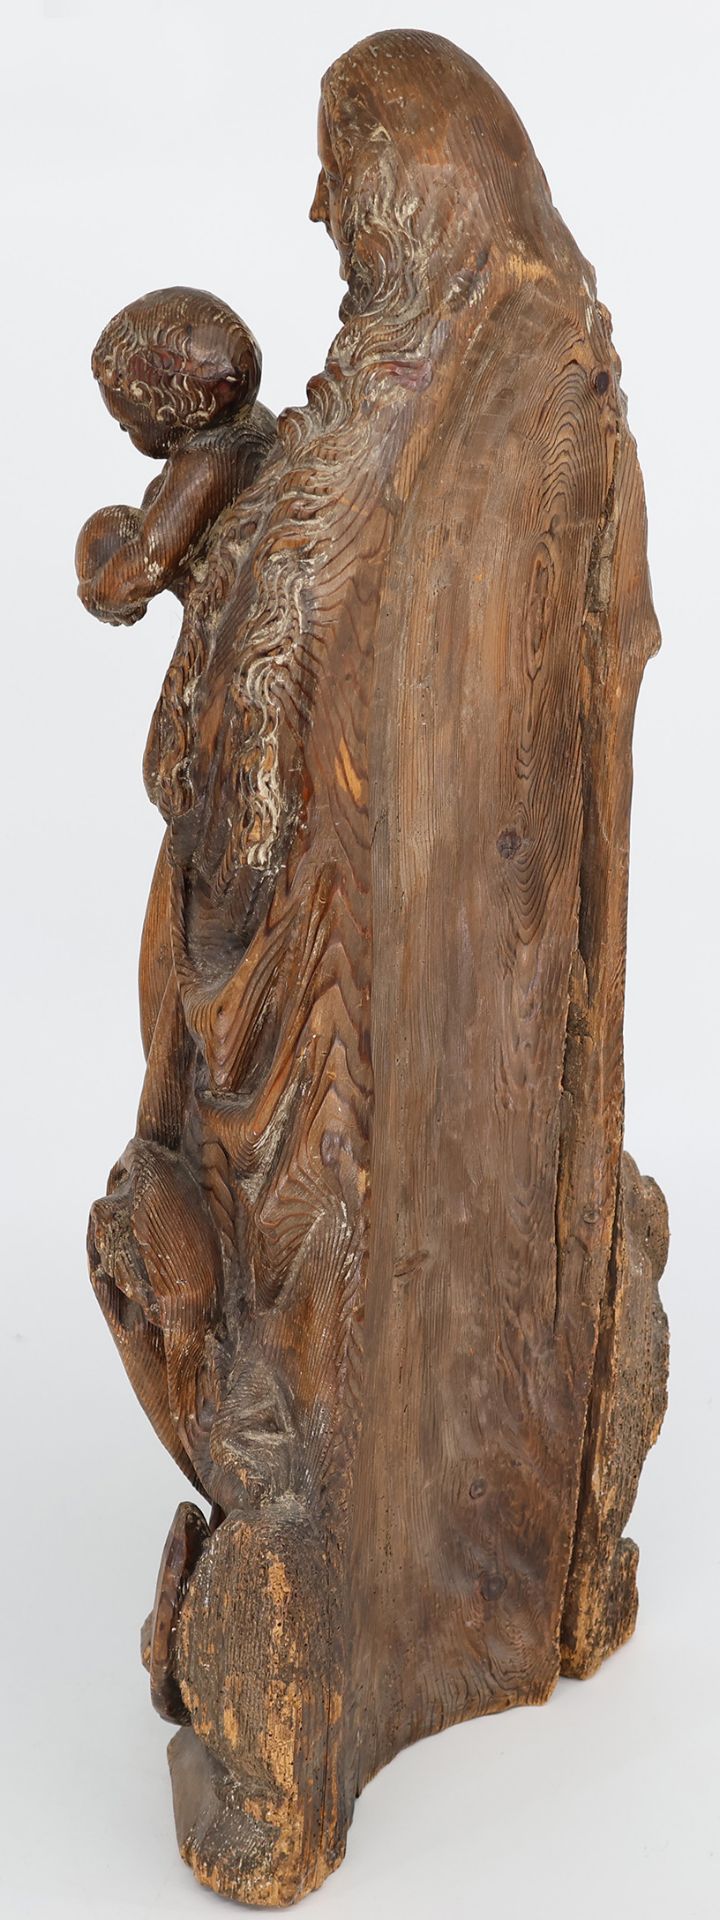 Madonna mit Kind, 17./18. Jh., Holz, geschnitzt, H 89 cm. Madonna with child, 17th/18th century, - Image 3 of 4